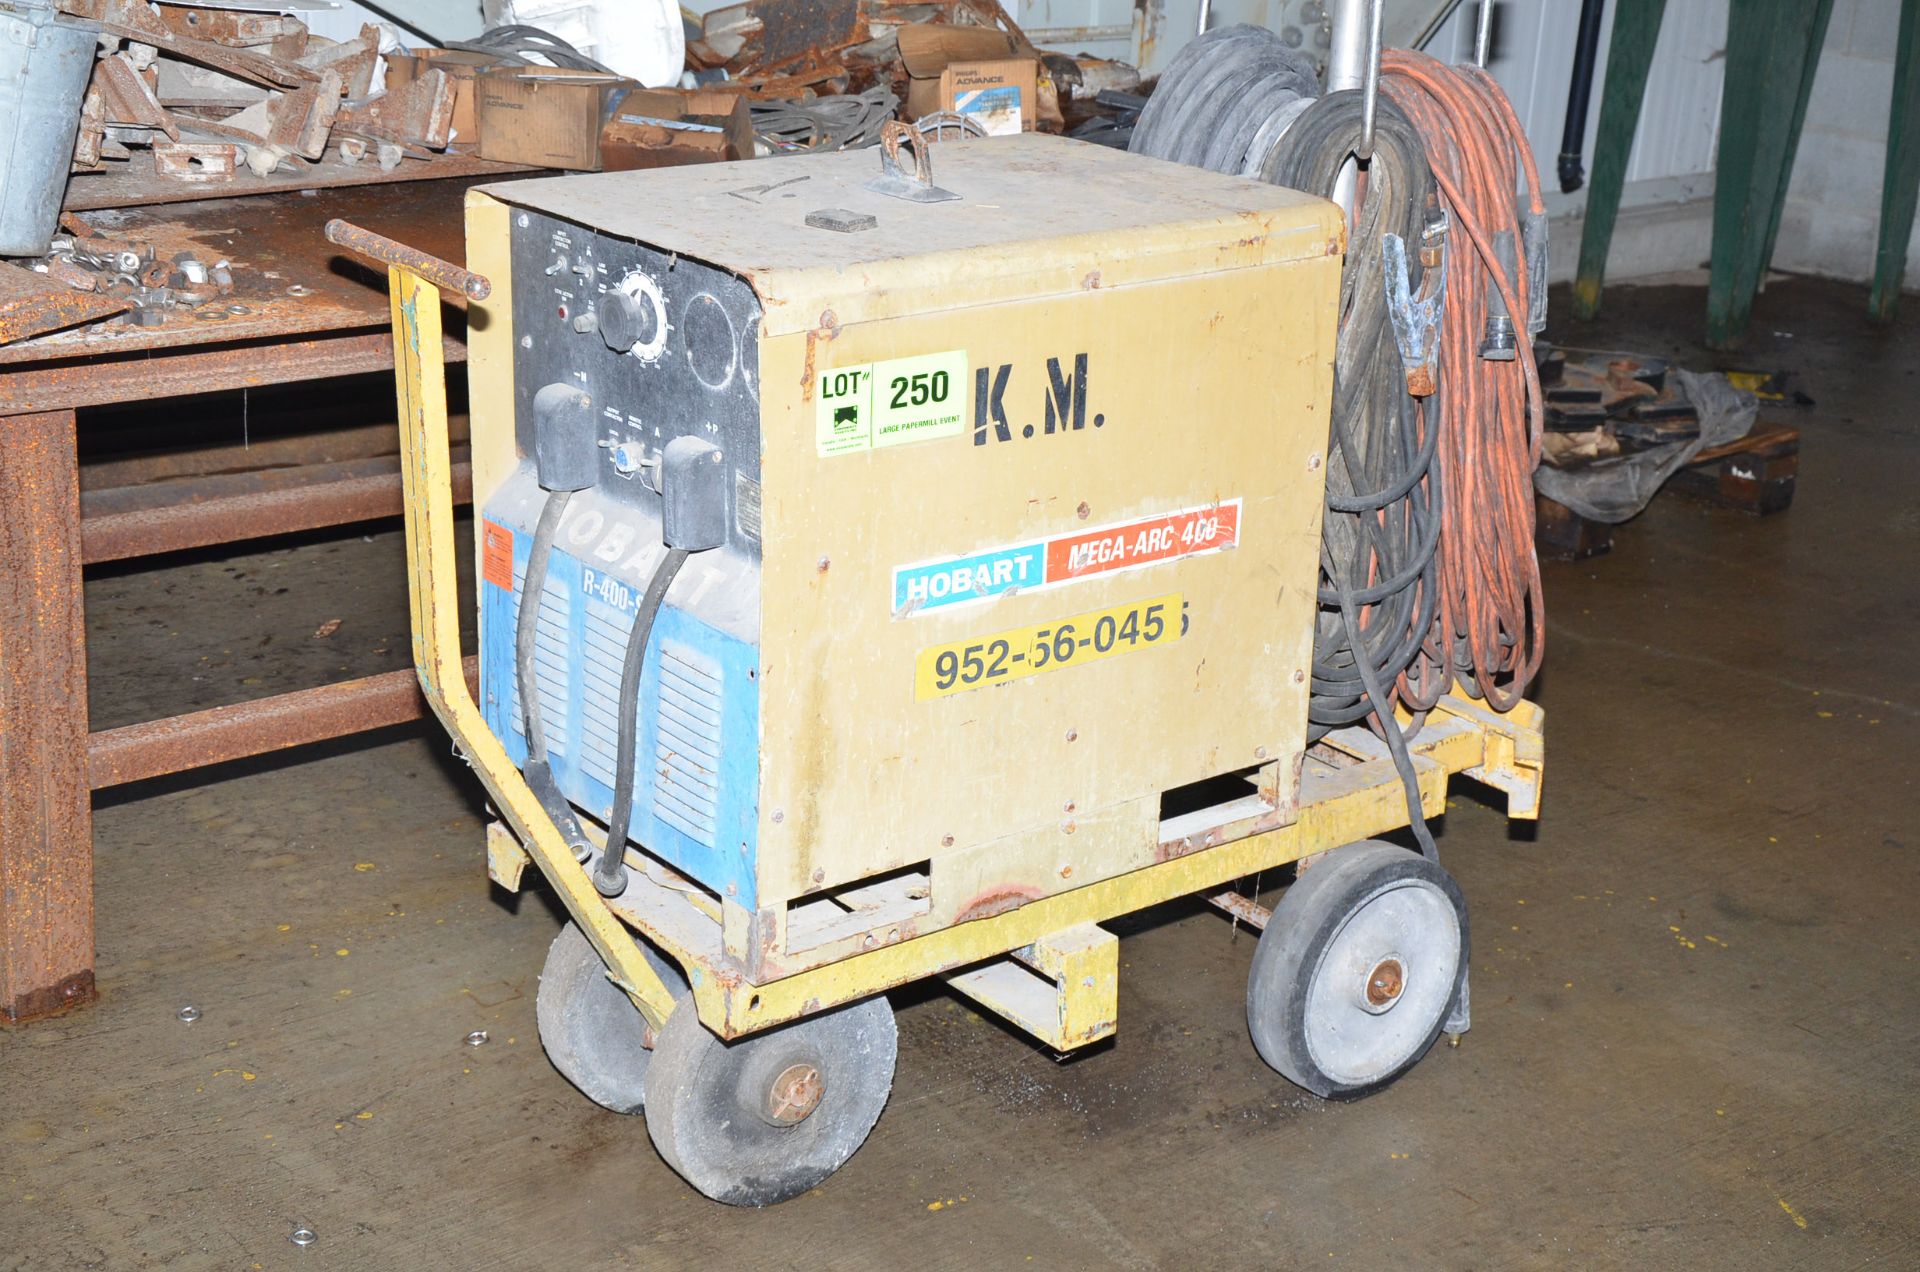 HOBART MEGA ARC 400 PORTABLE ARC WELDER WITH CABLES AND GUN, S/N: N/A [RIGGING FEES FOR LOT #